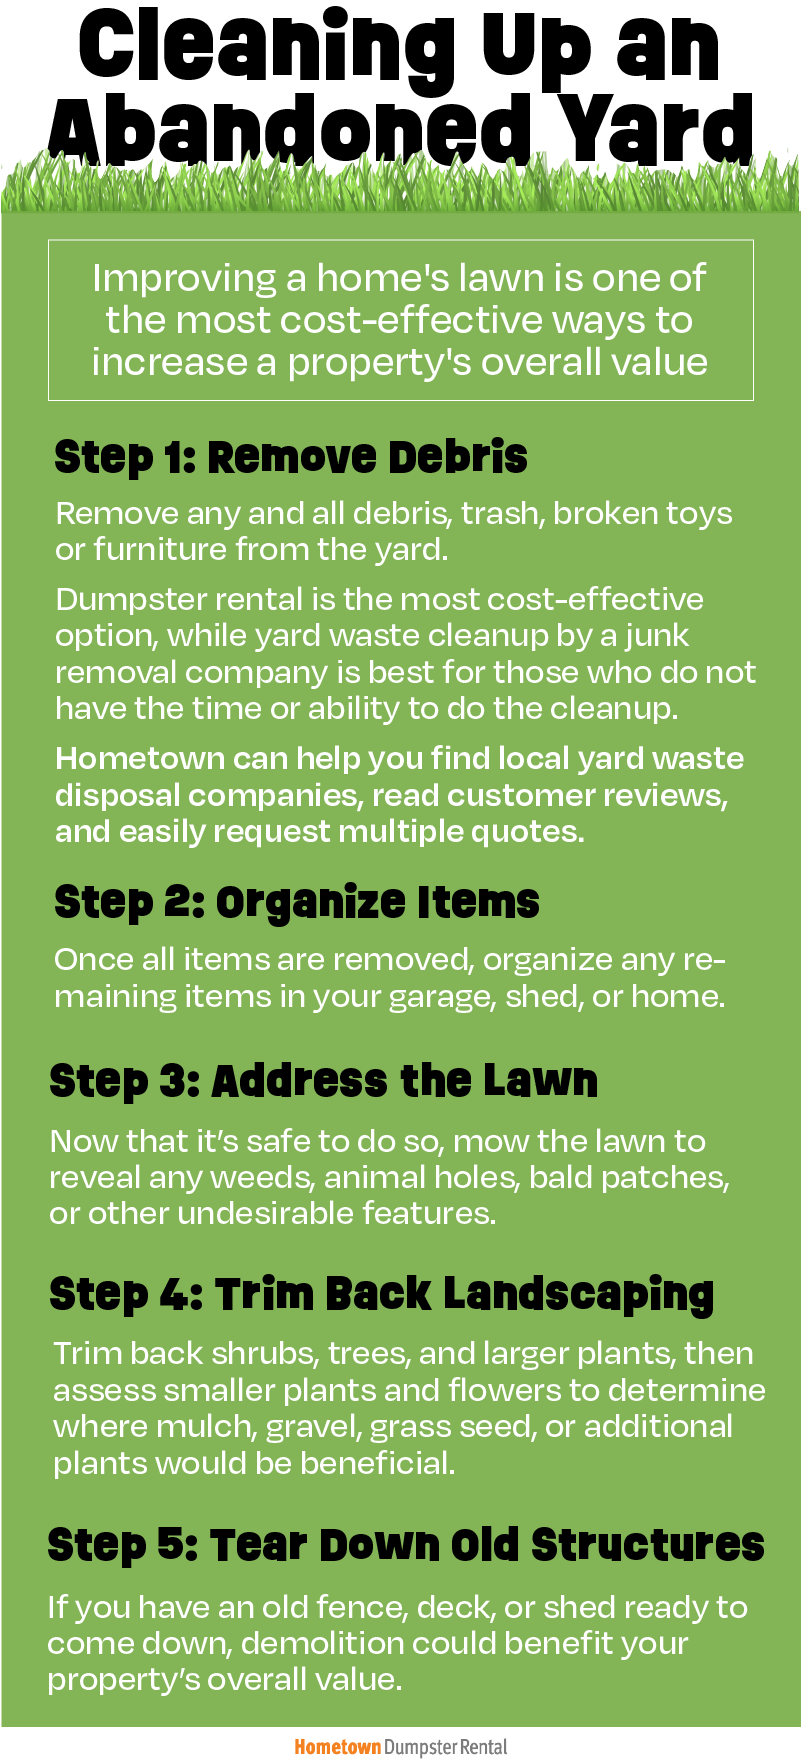 infographic about cleaning up an abandoned yard